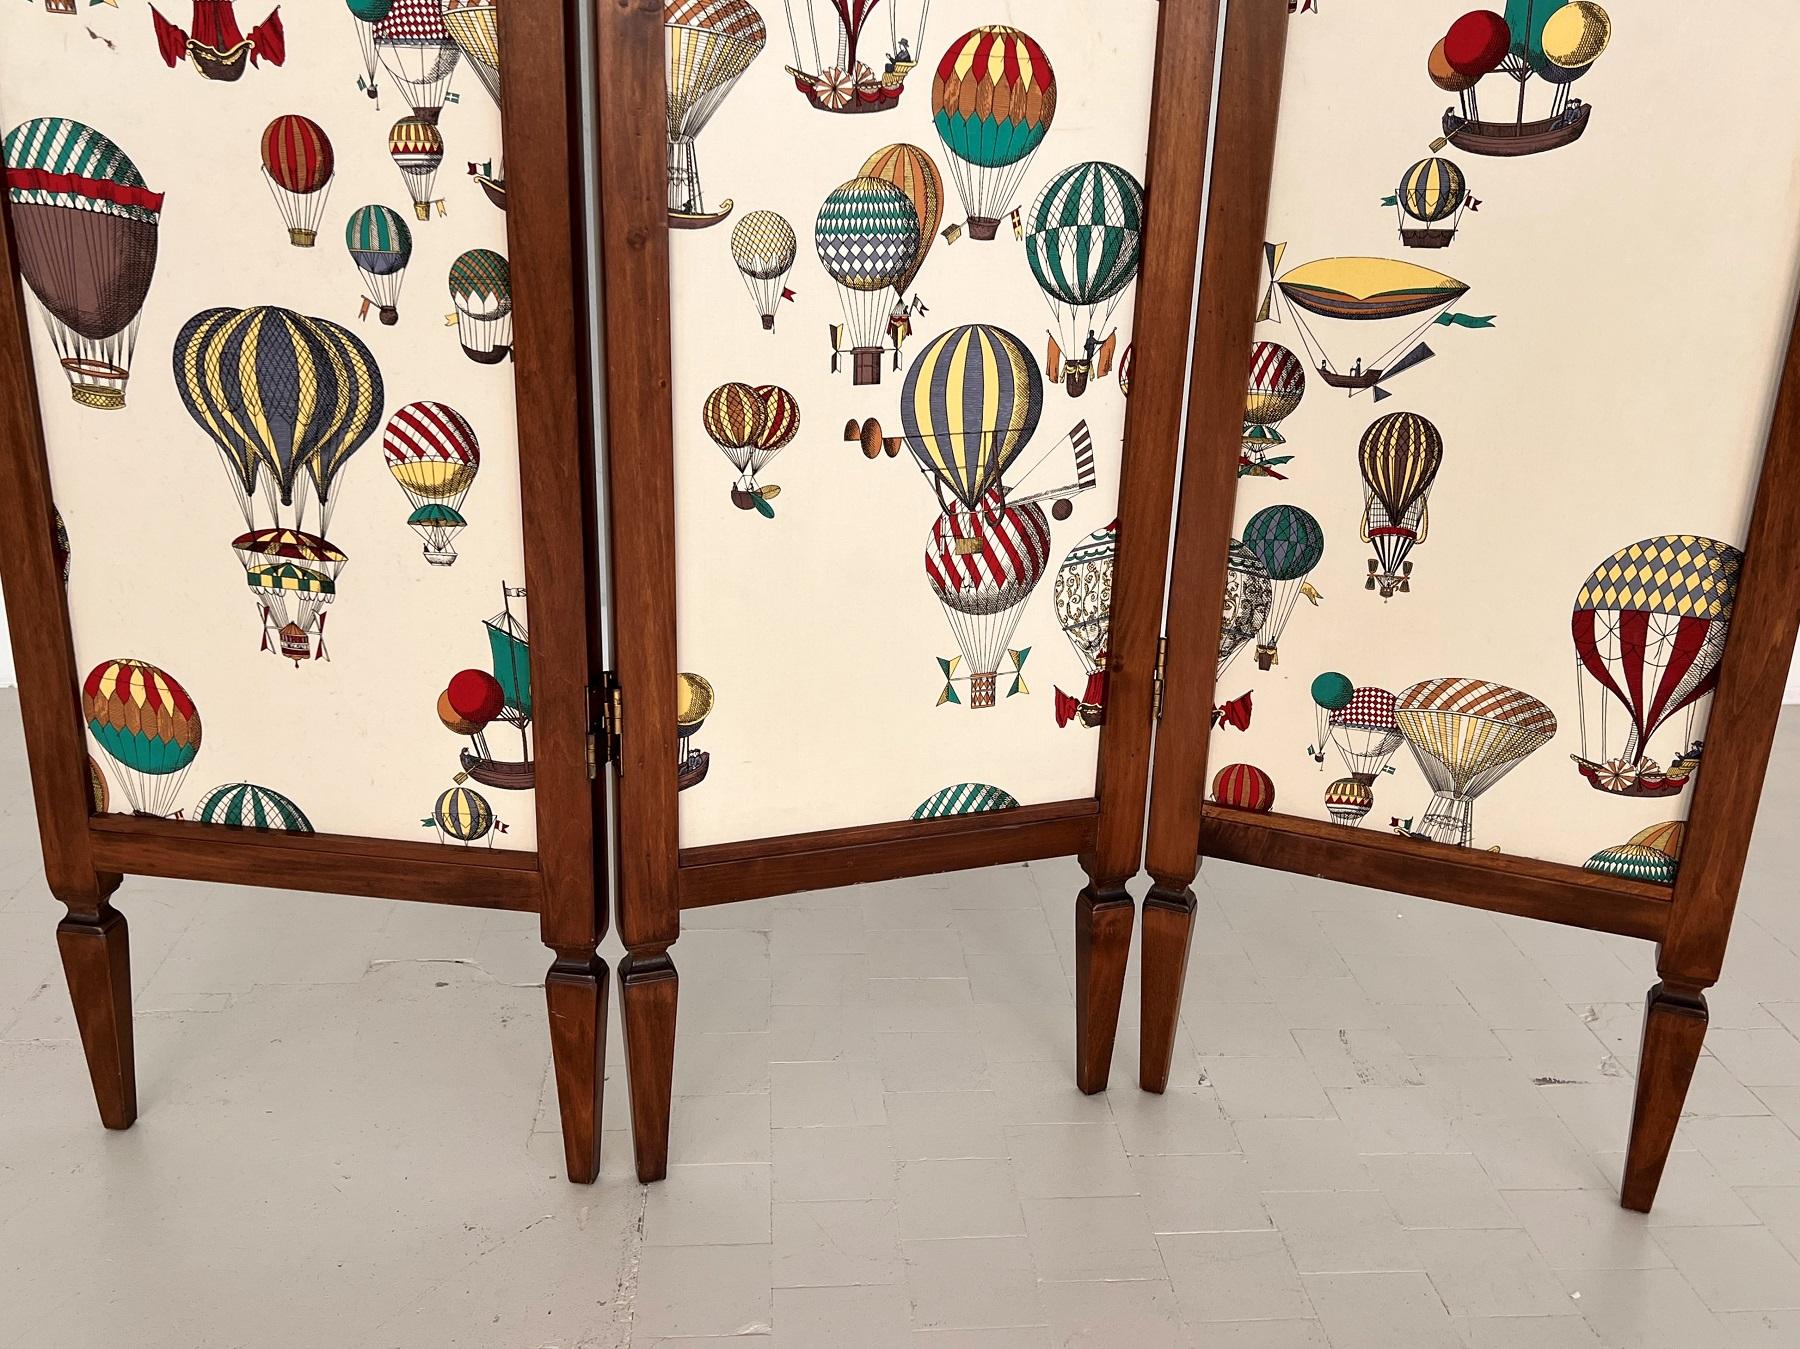 Late 20th Century Italian Midcentury Folding Screen Room Divider Paravent with Fornasetti Fabric